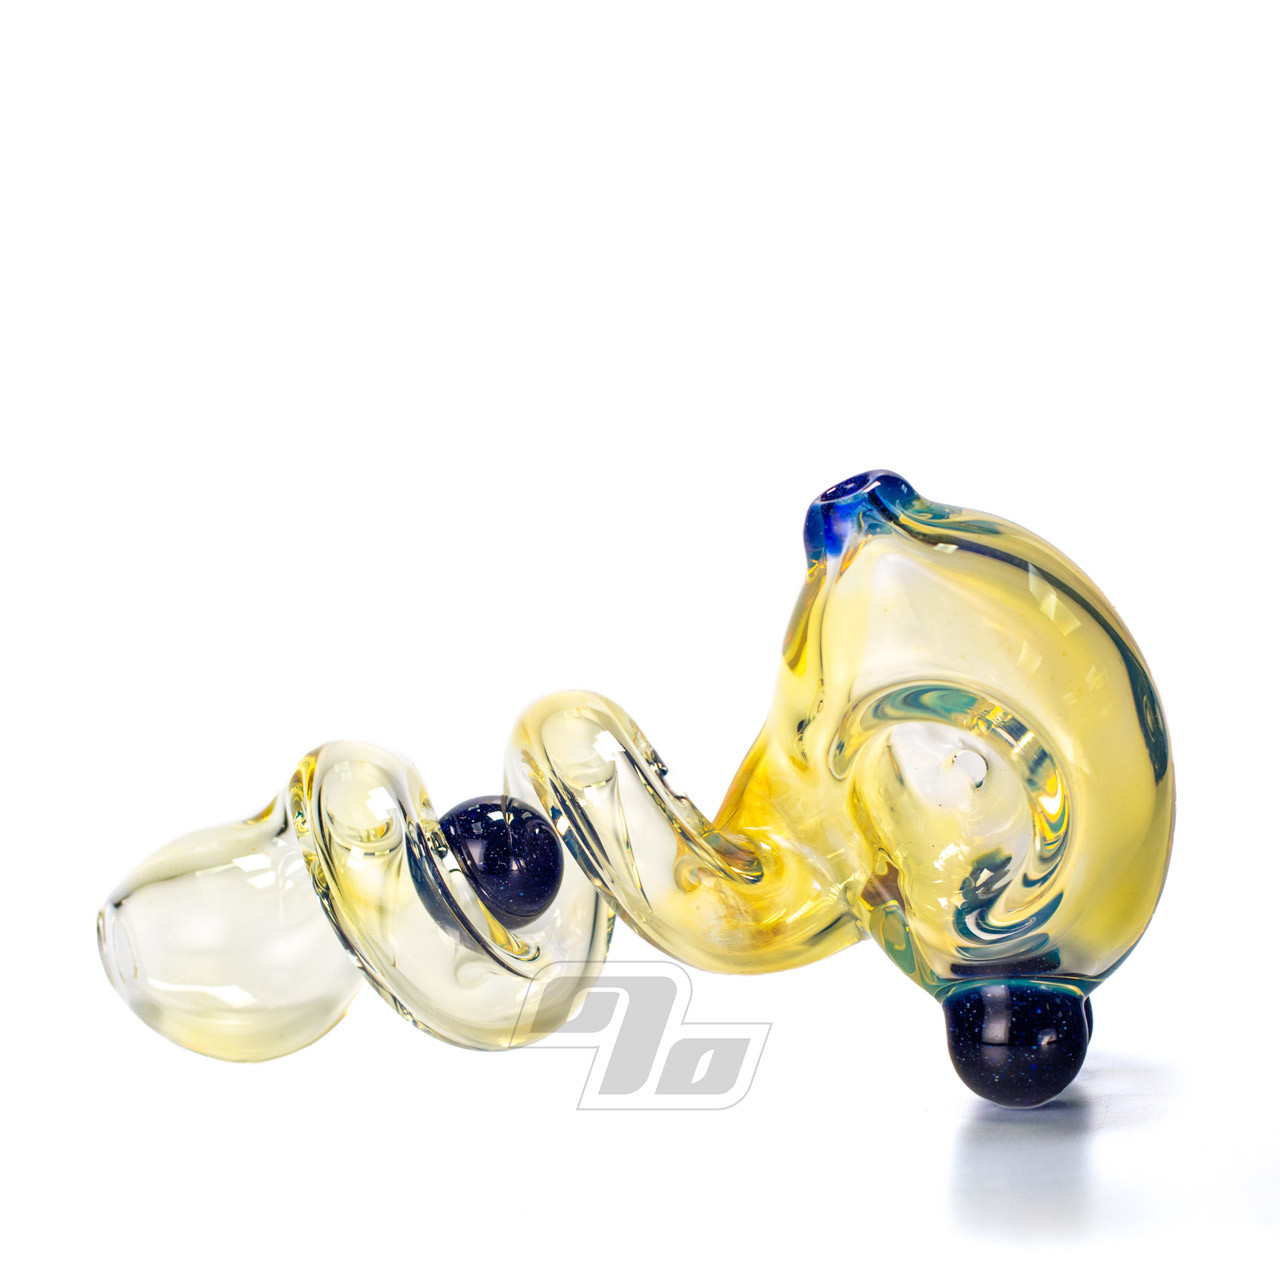 2.5 Inch Spiral Spoon Glass Hand Pipe Weed Bowl